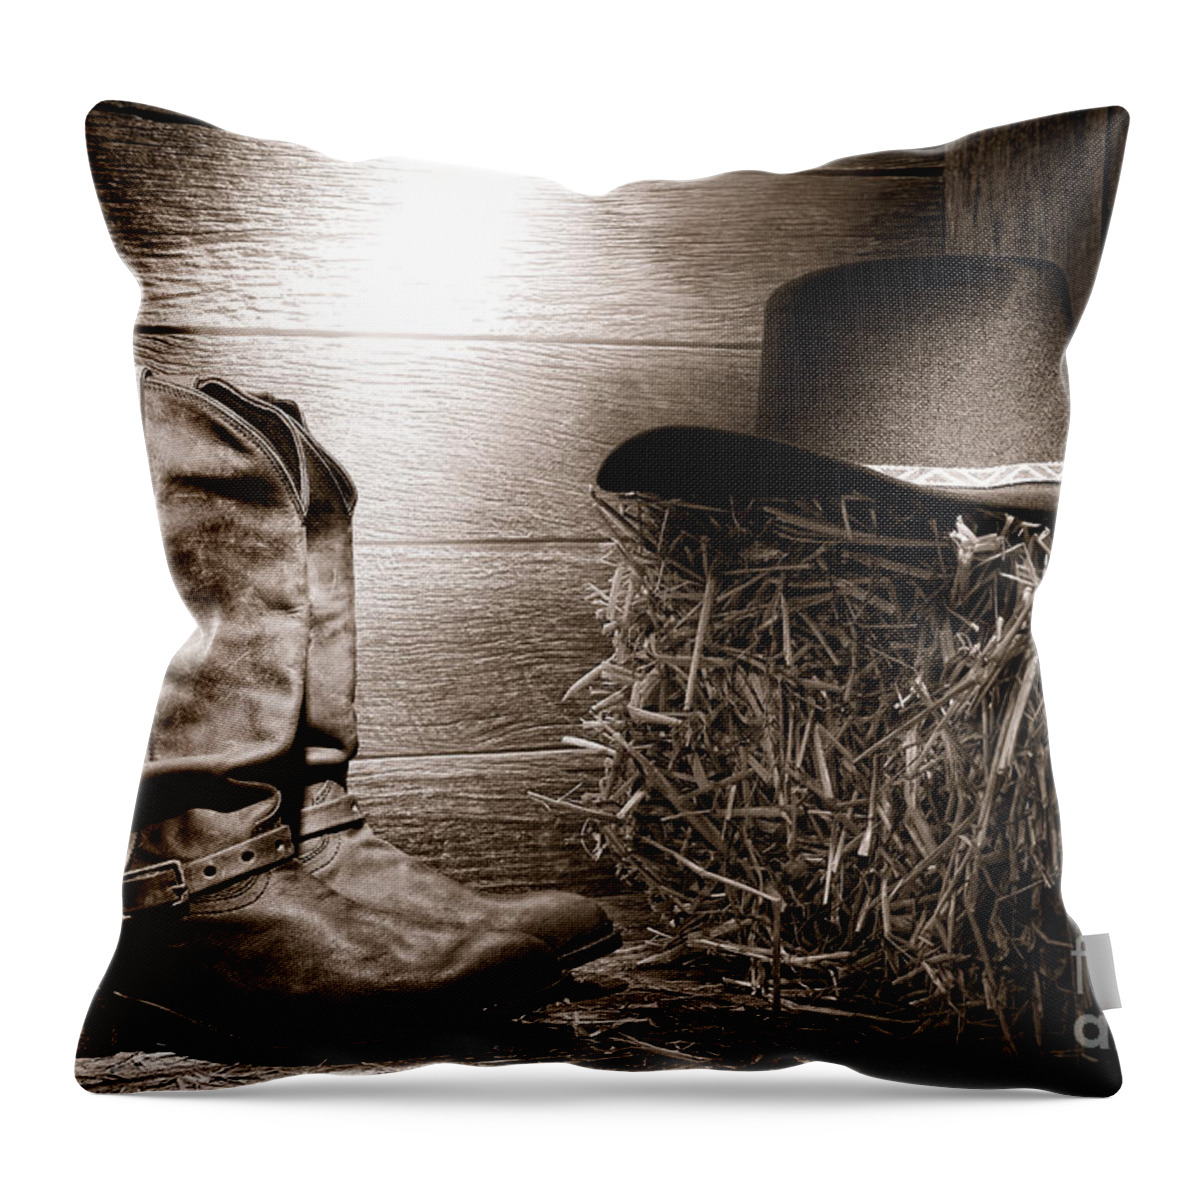 Western Throw Pillow featuring the photograph The Old Boots by Olivier Le Queinec